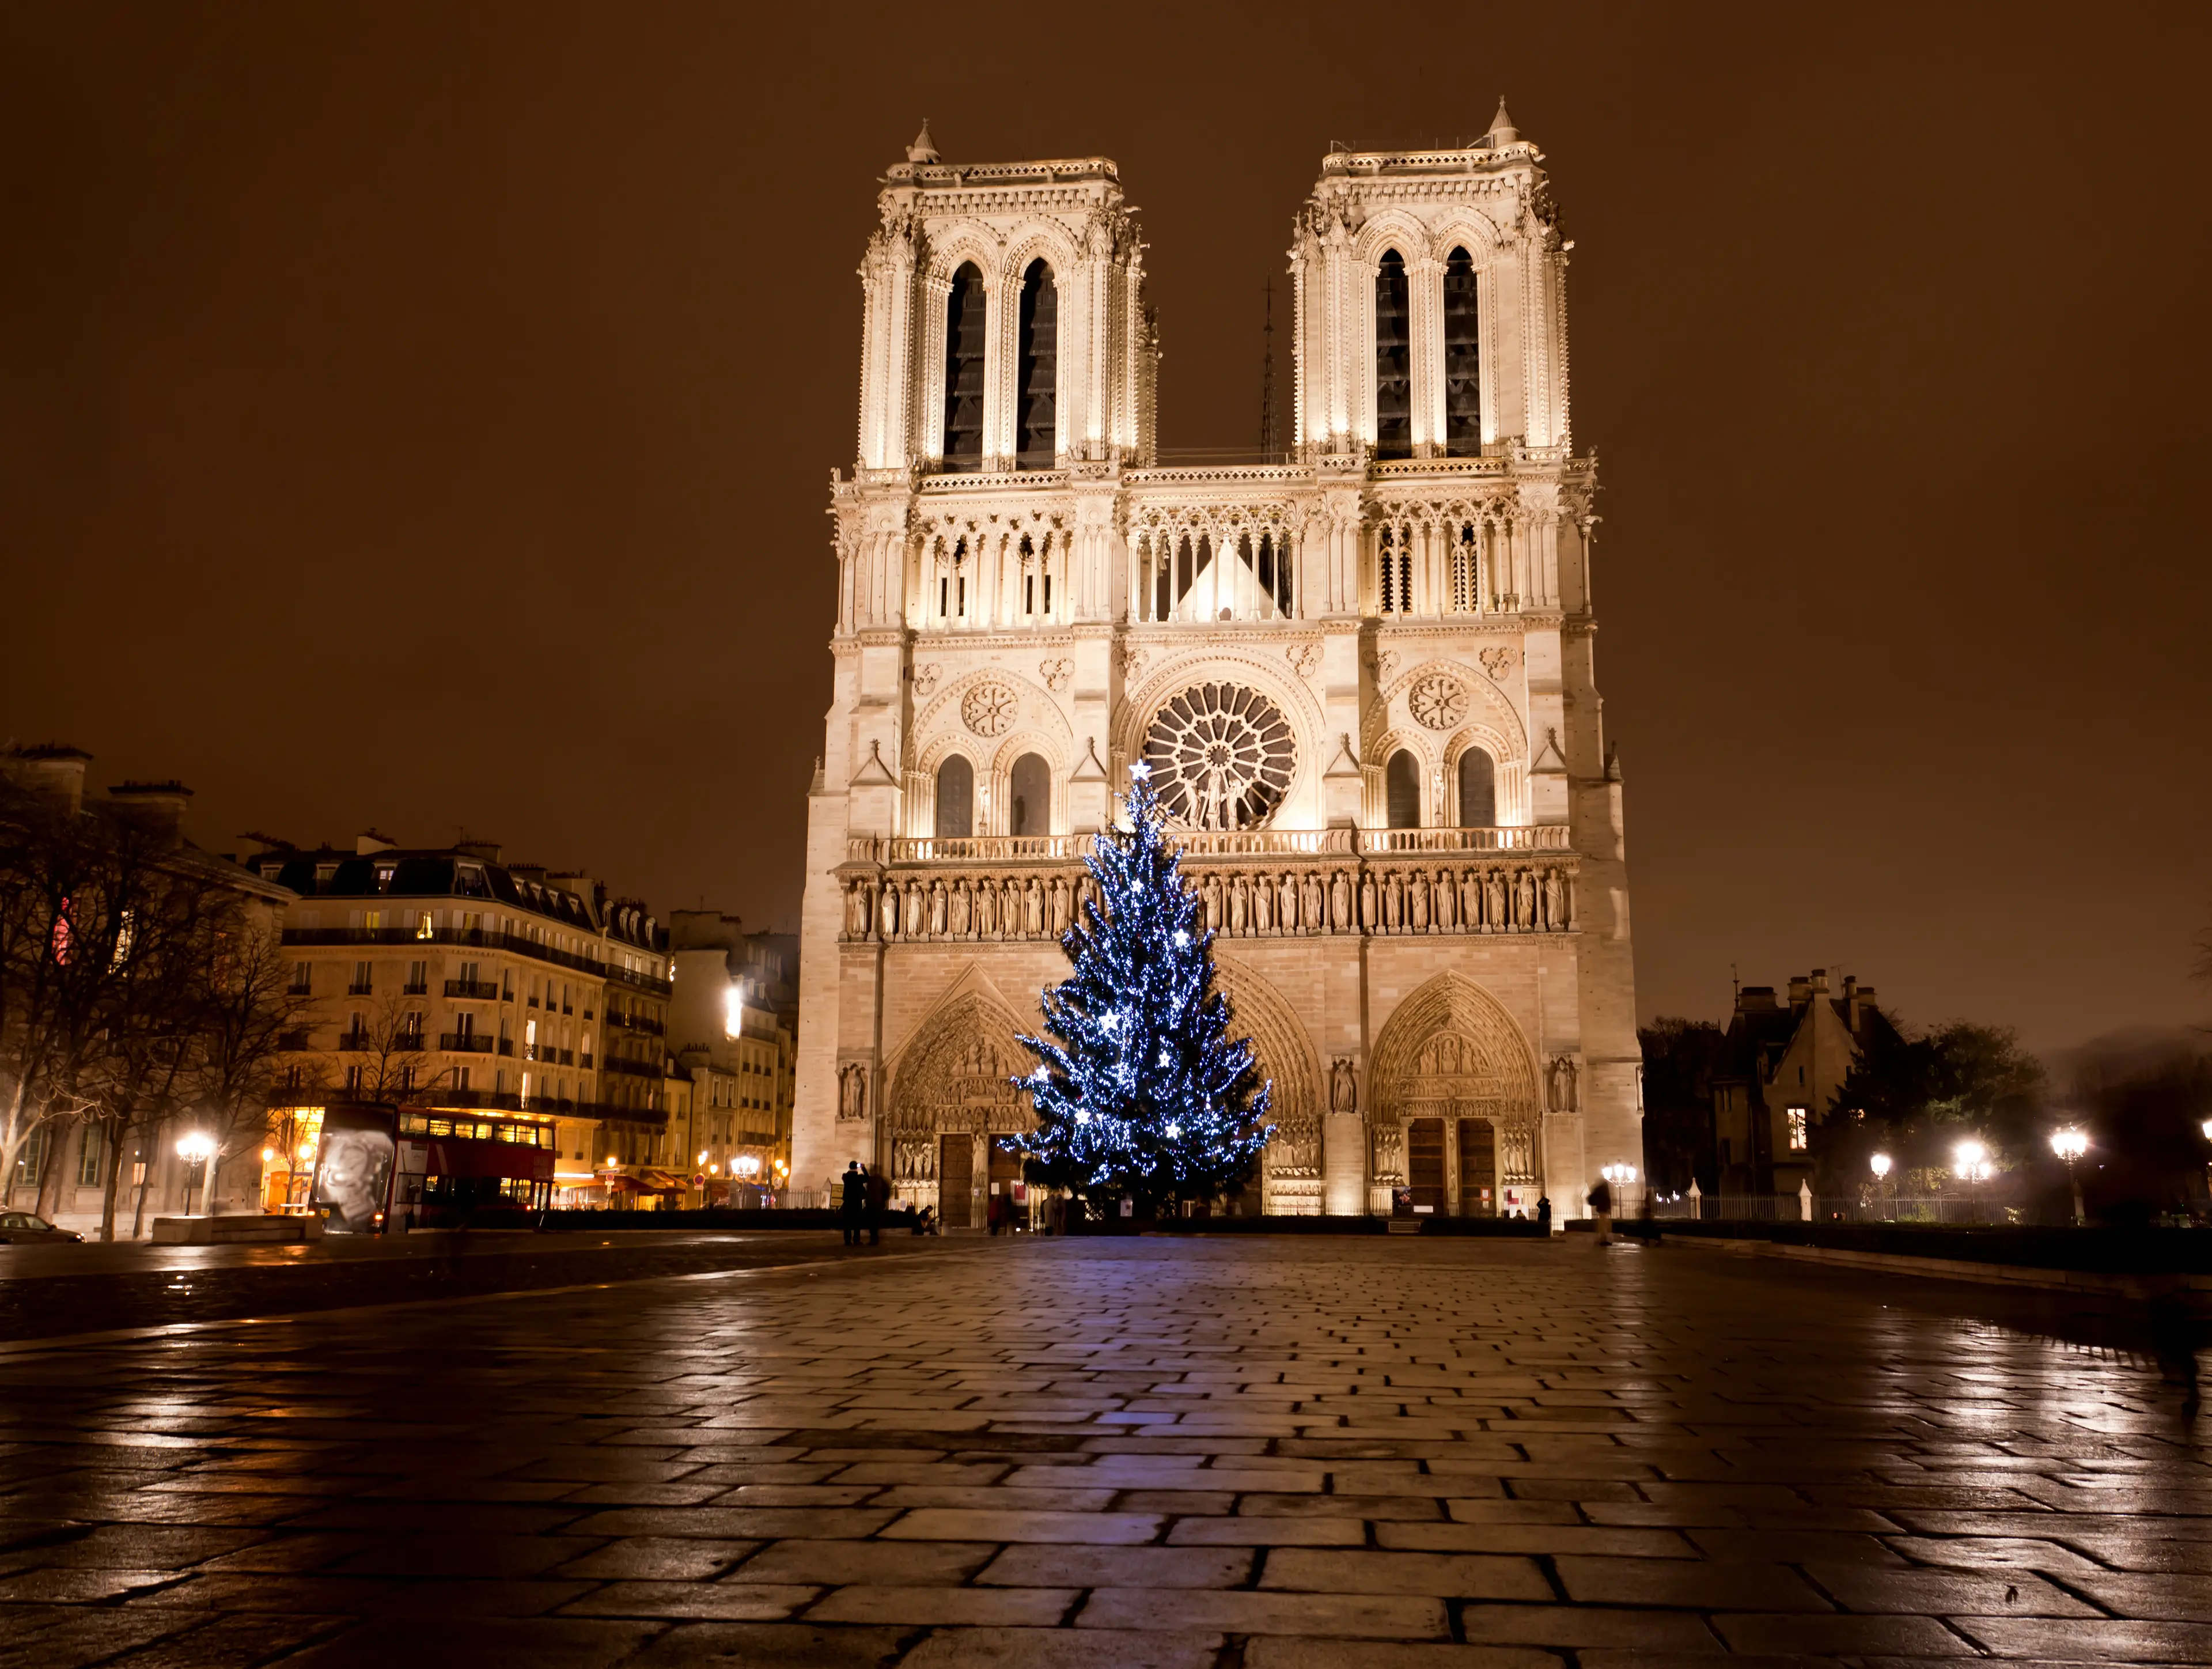 The famous Notre Dame at night